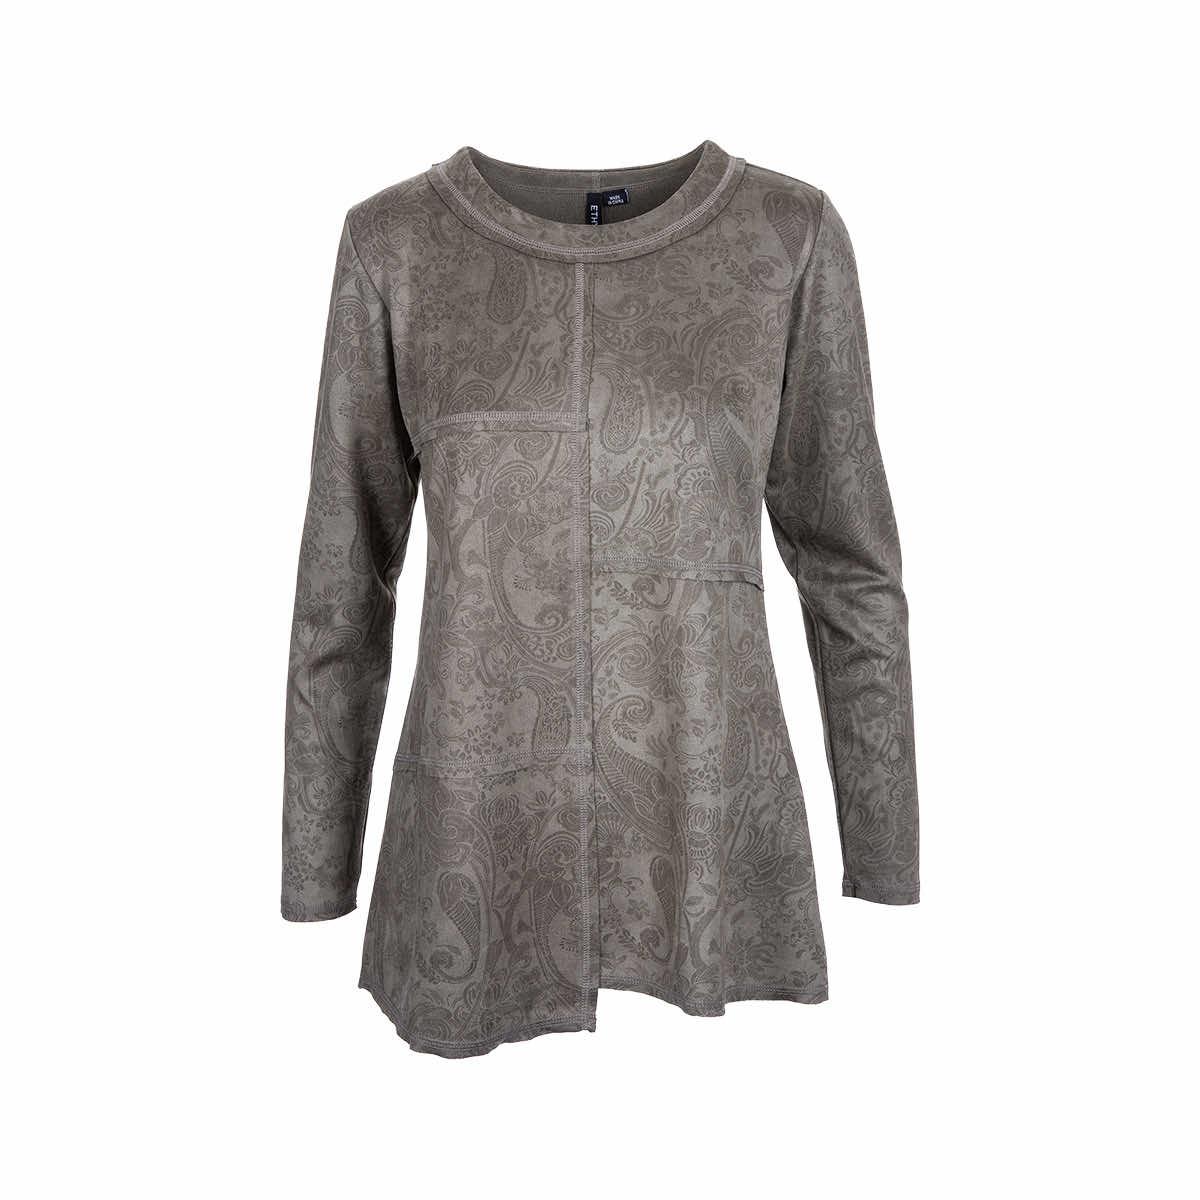  Women's Pieced Long Sleeve Sueded Top